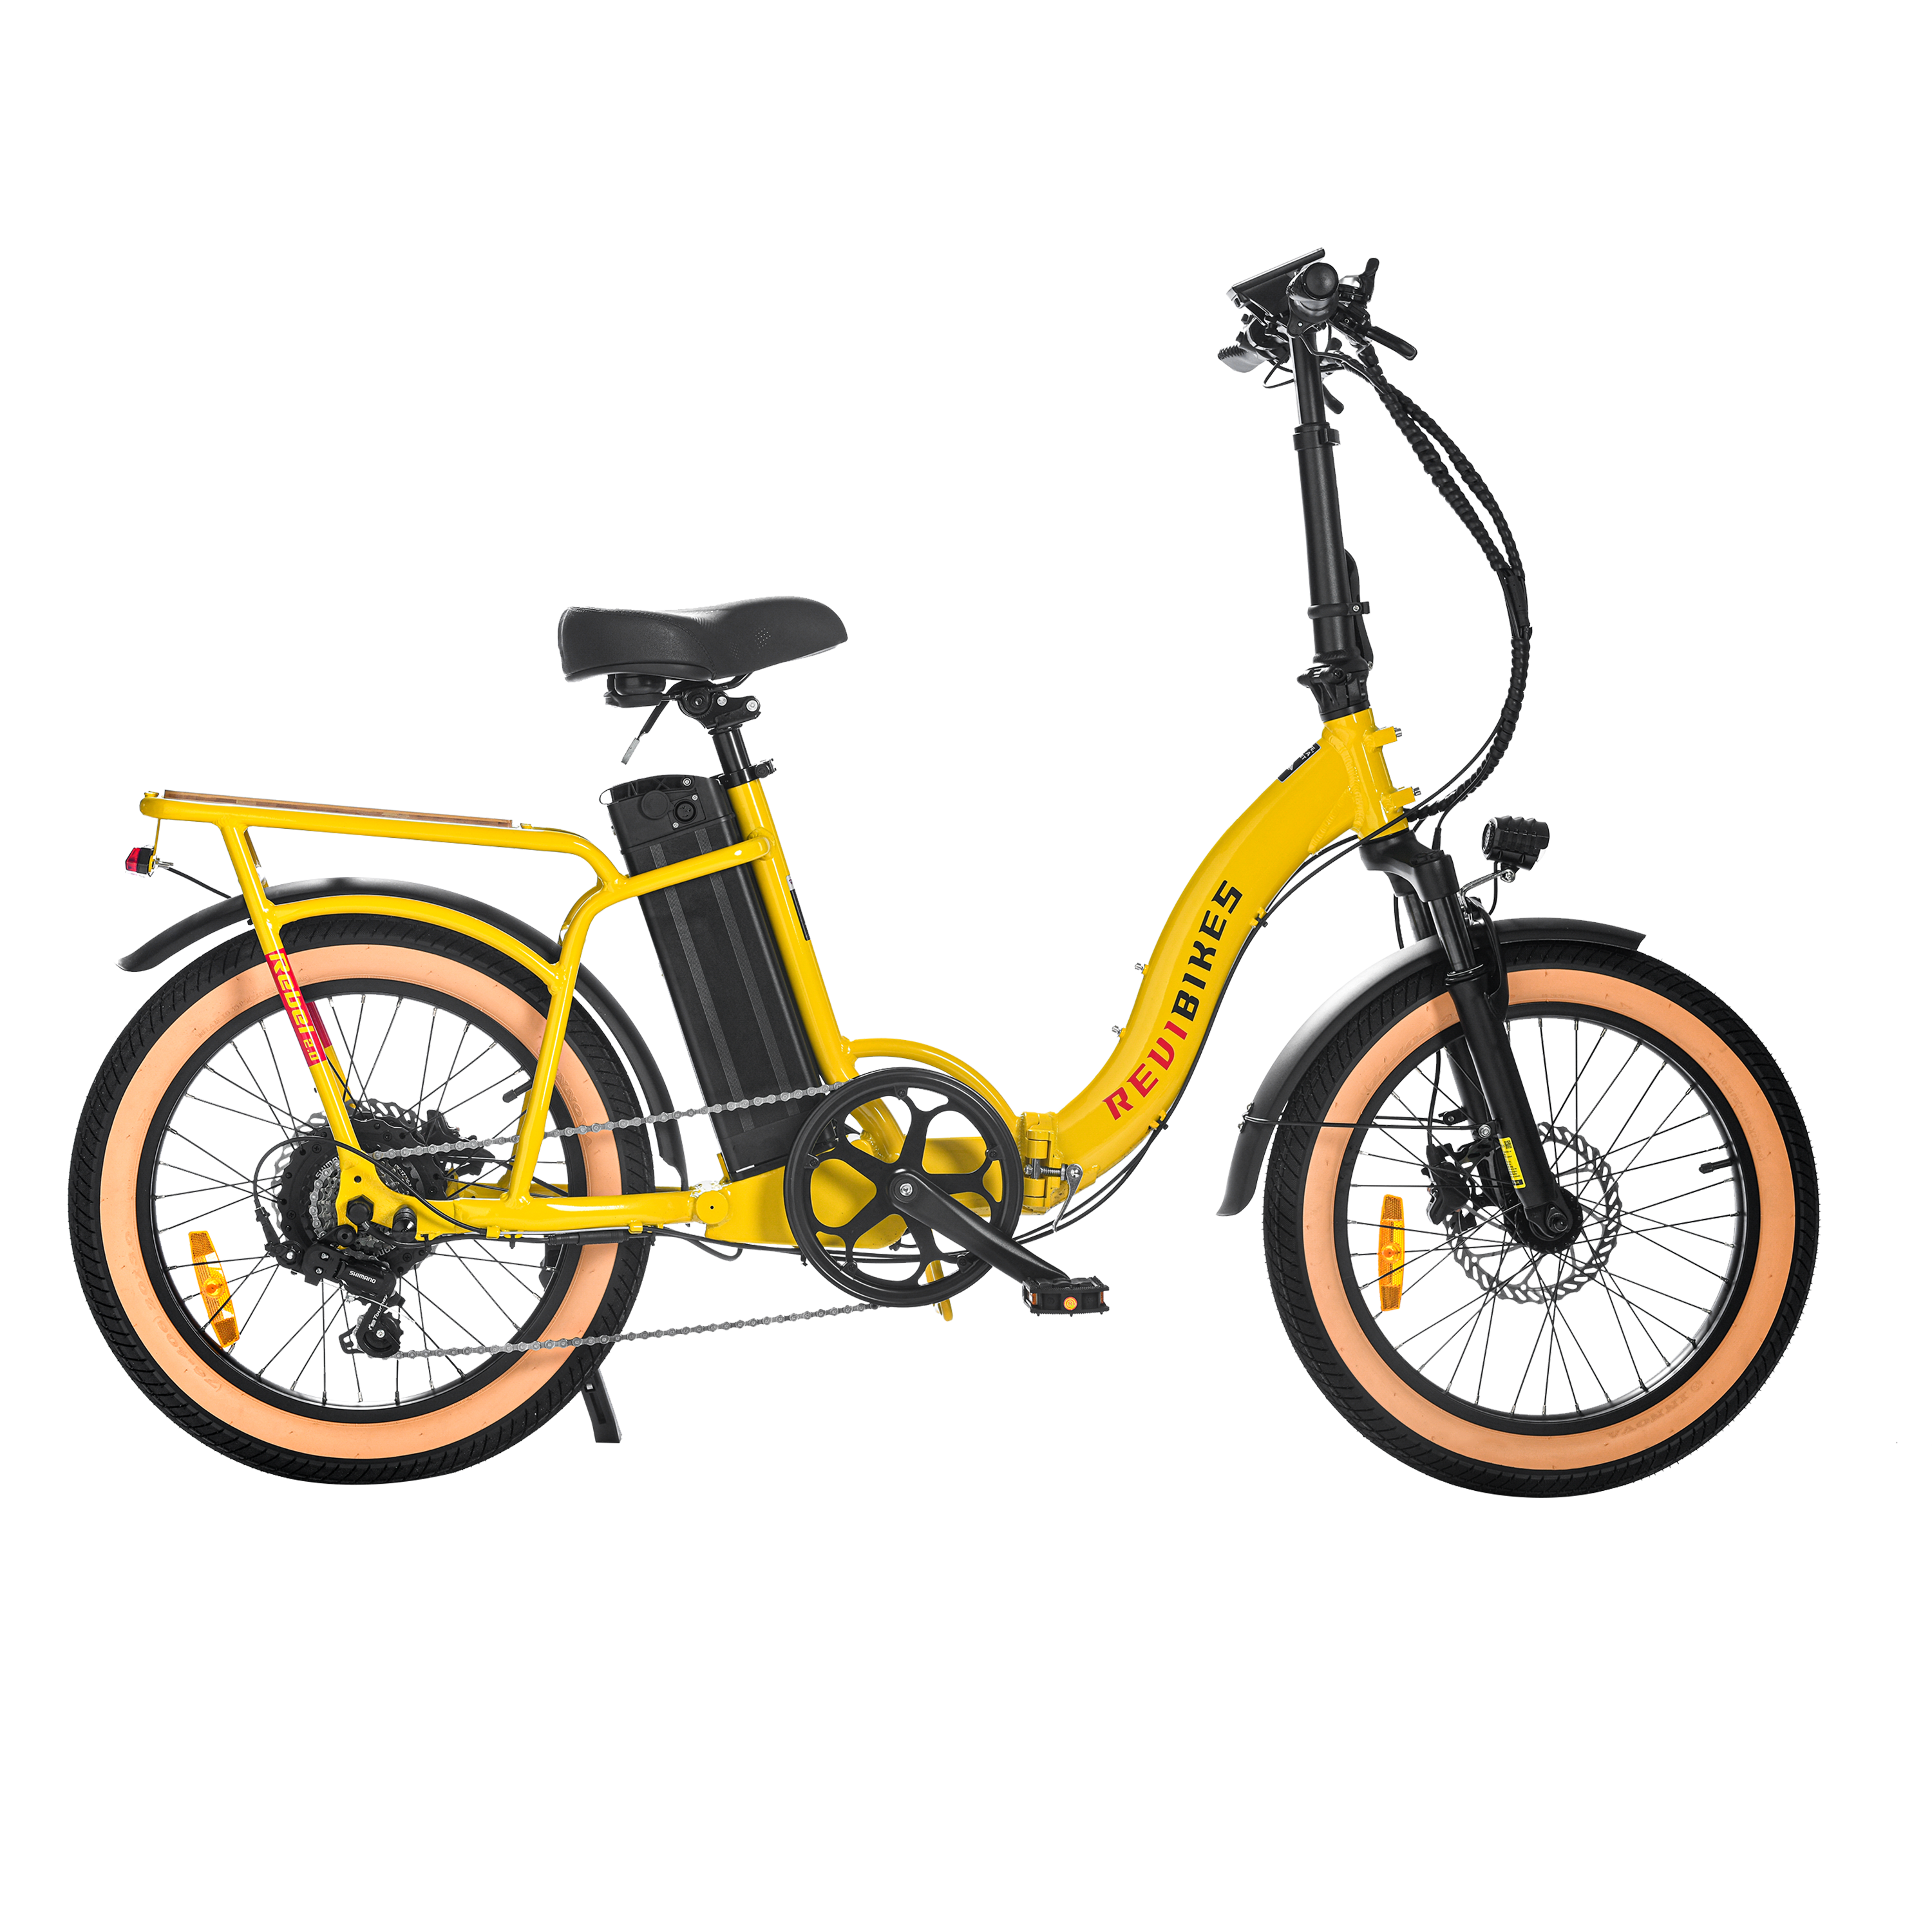 Revibikes 20" yellow ebike women's folding electric bike compact utility ebike foldable fat tire affordable ebikes ladies throttle electric bicycle commuter step through ebike 48V 750W 15ah folding electric bike for adults fold up ebike for short ladies under $1000 best pedal assist bike urban ebikes folding 20"ebike vtuvia sf20 foldable electric bike folding fat tire wiht removable battery